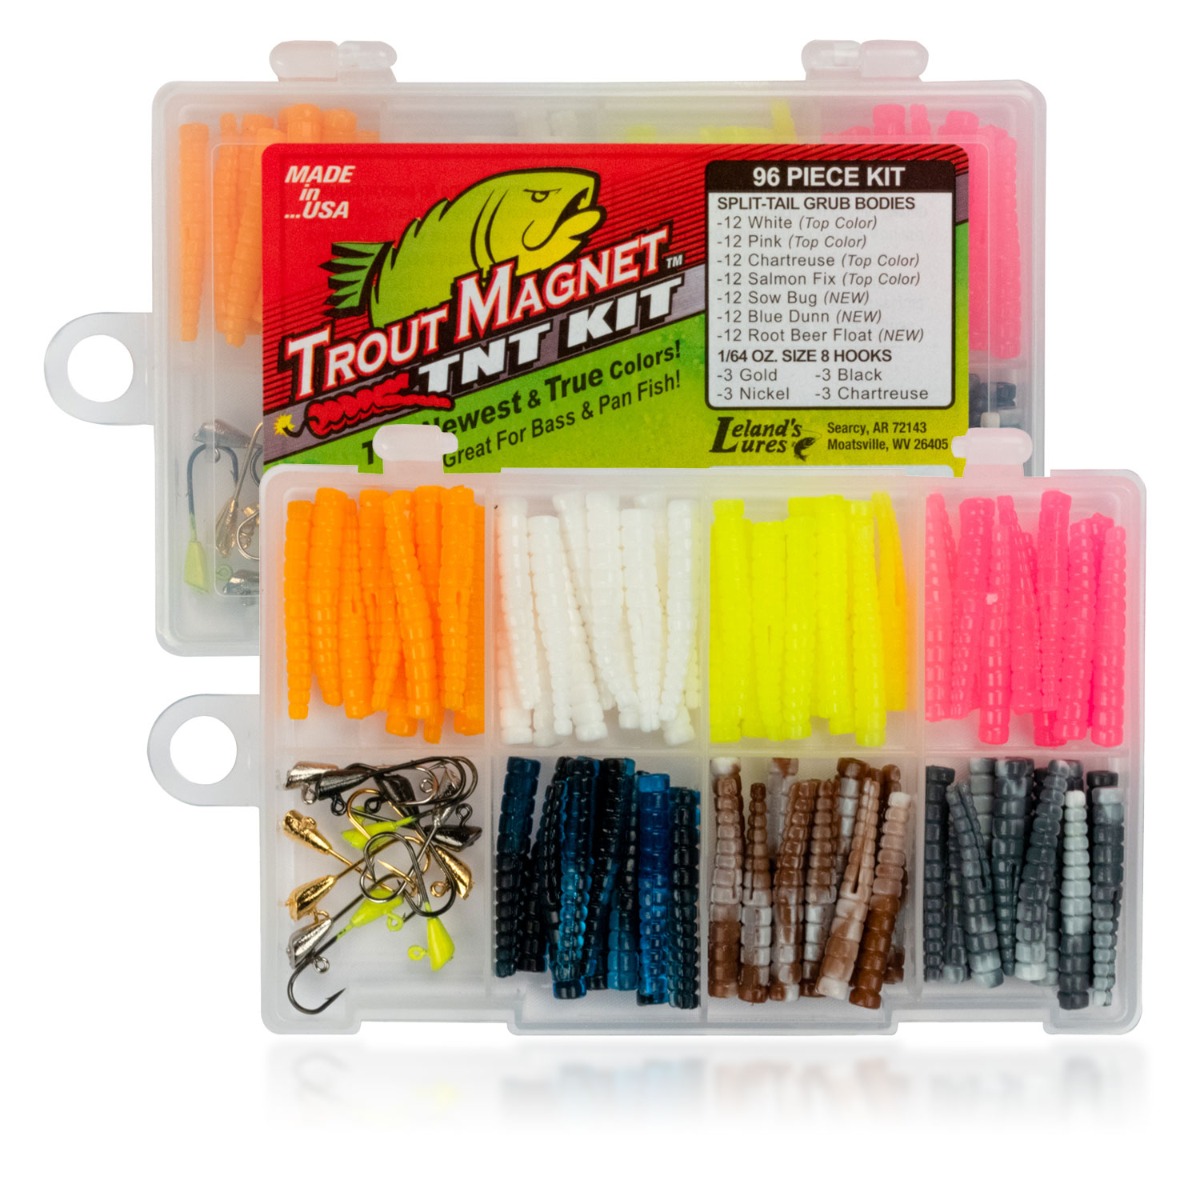 Buy Trout Magnet Mini Kit - 70 Grub Bodies and 15 Size 14 Hooks online